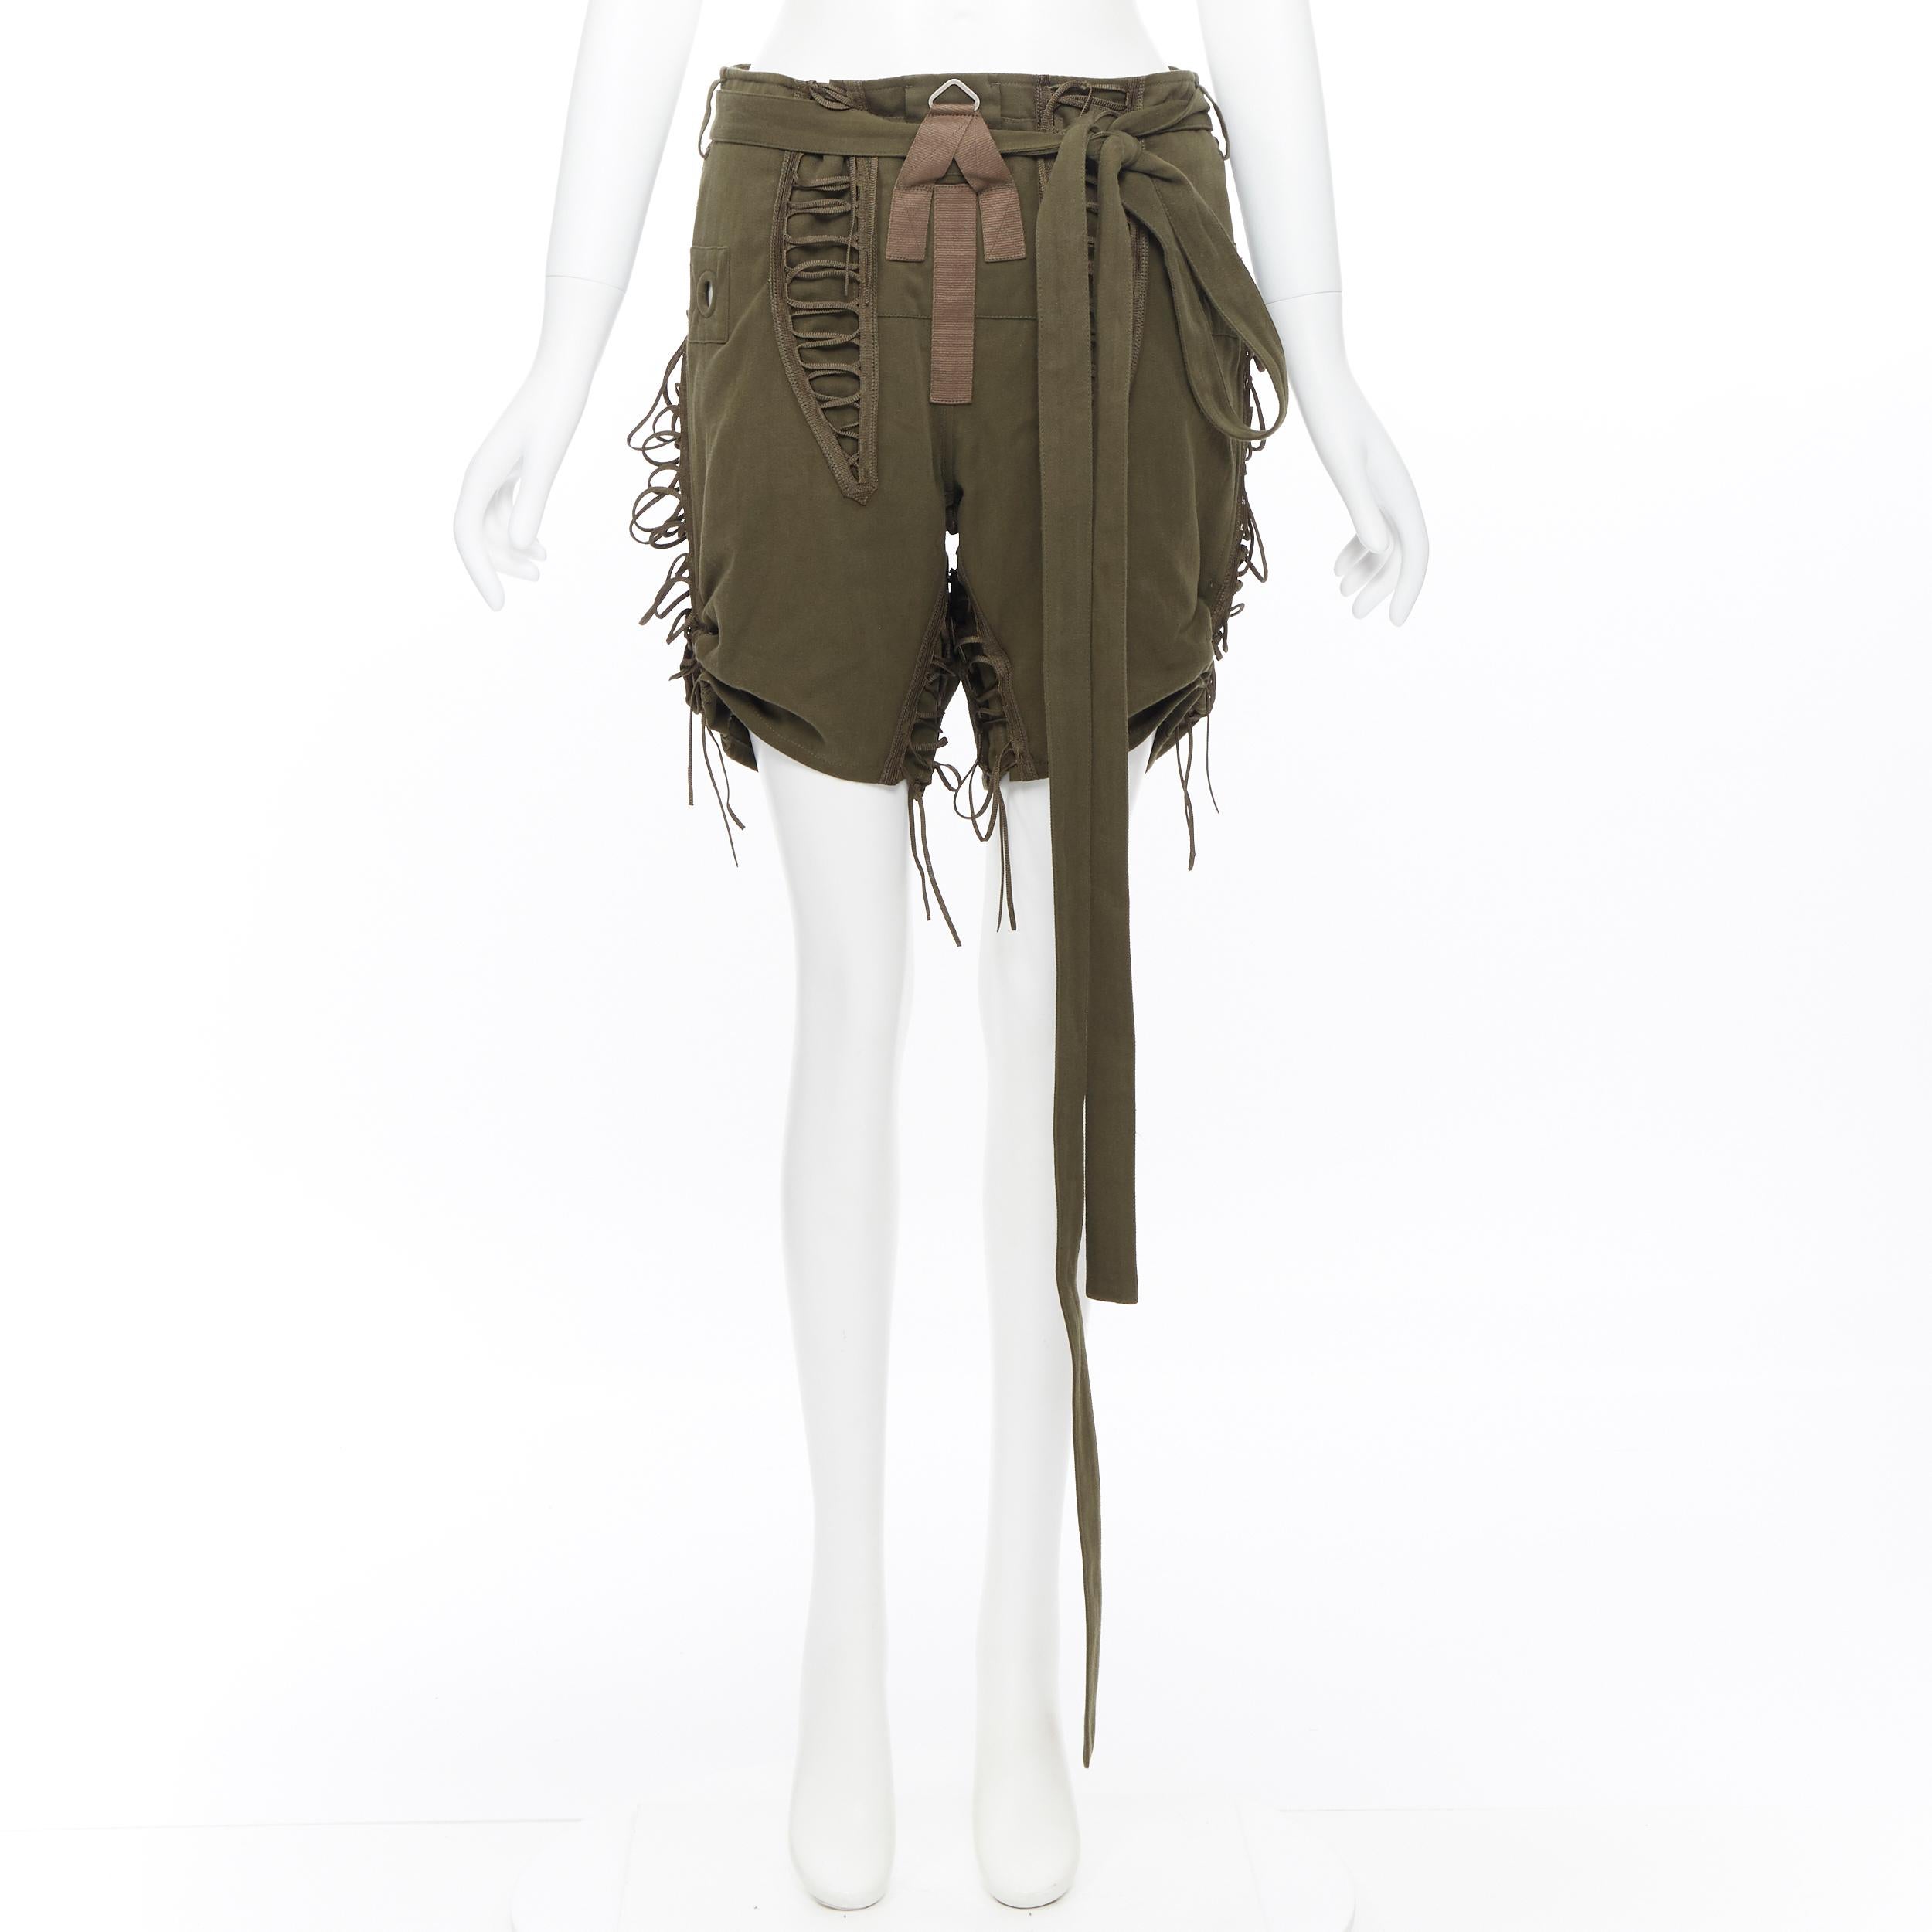 new SAINT LAURENT SS18 khaki green lace detail cotton belted military shorts F38 Reference: TGAS/A04861 
Brand: Saint Laurent 
Designer: Antony Vacarello
Collection: Spring Summer 2018 Runway 
Material: Cotton 
Color: Green 
Pattern: Solid 
Closure: